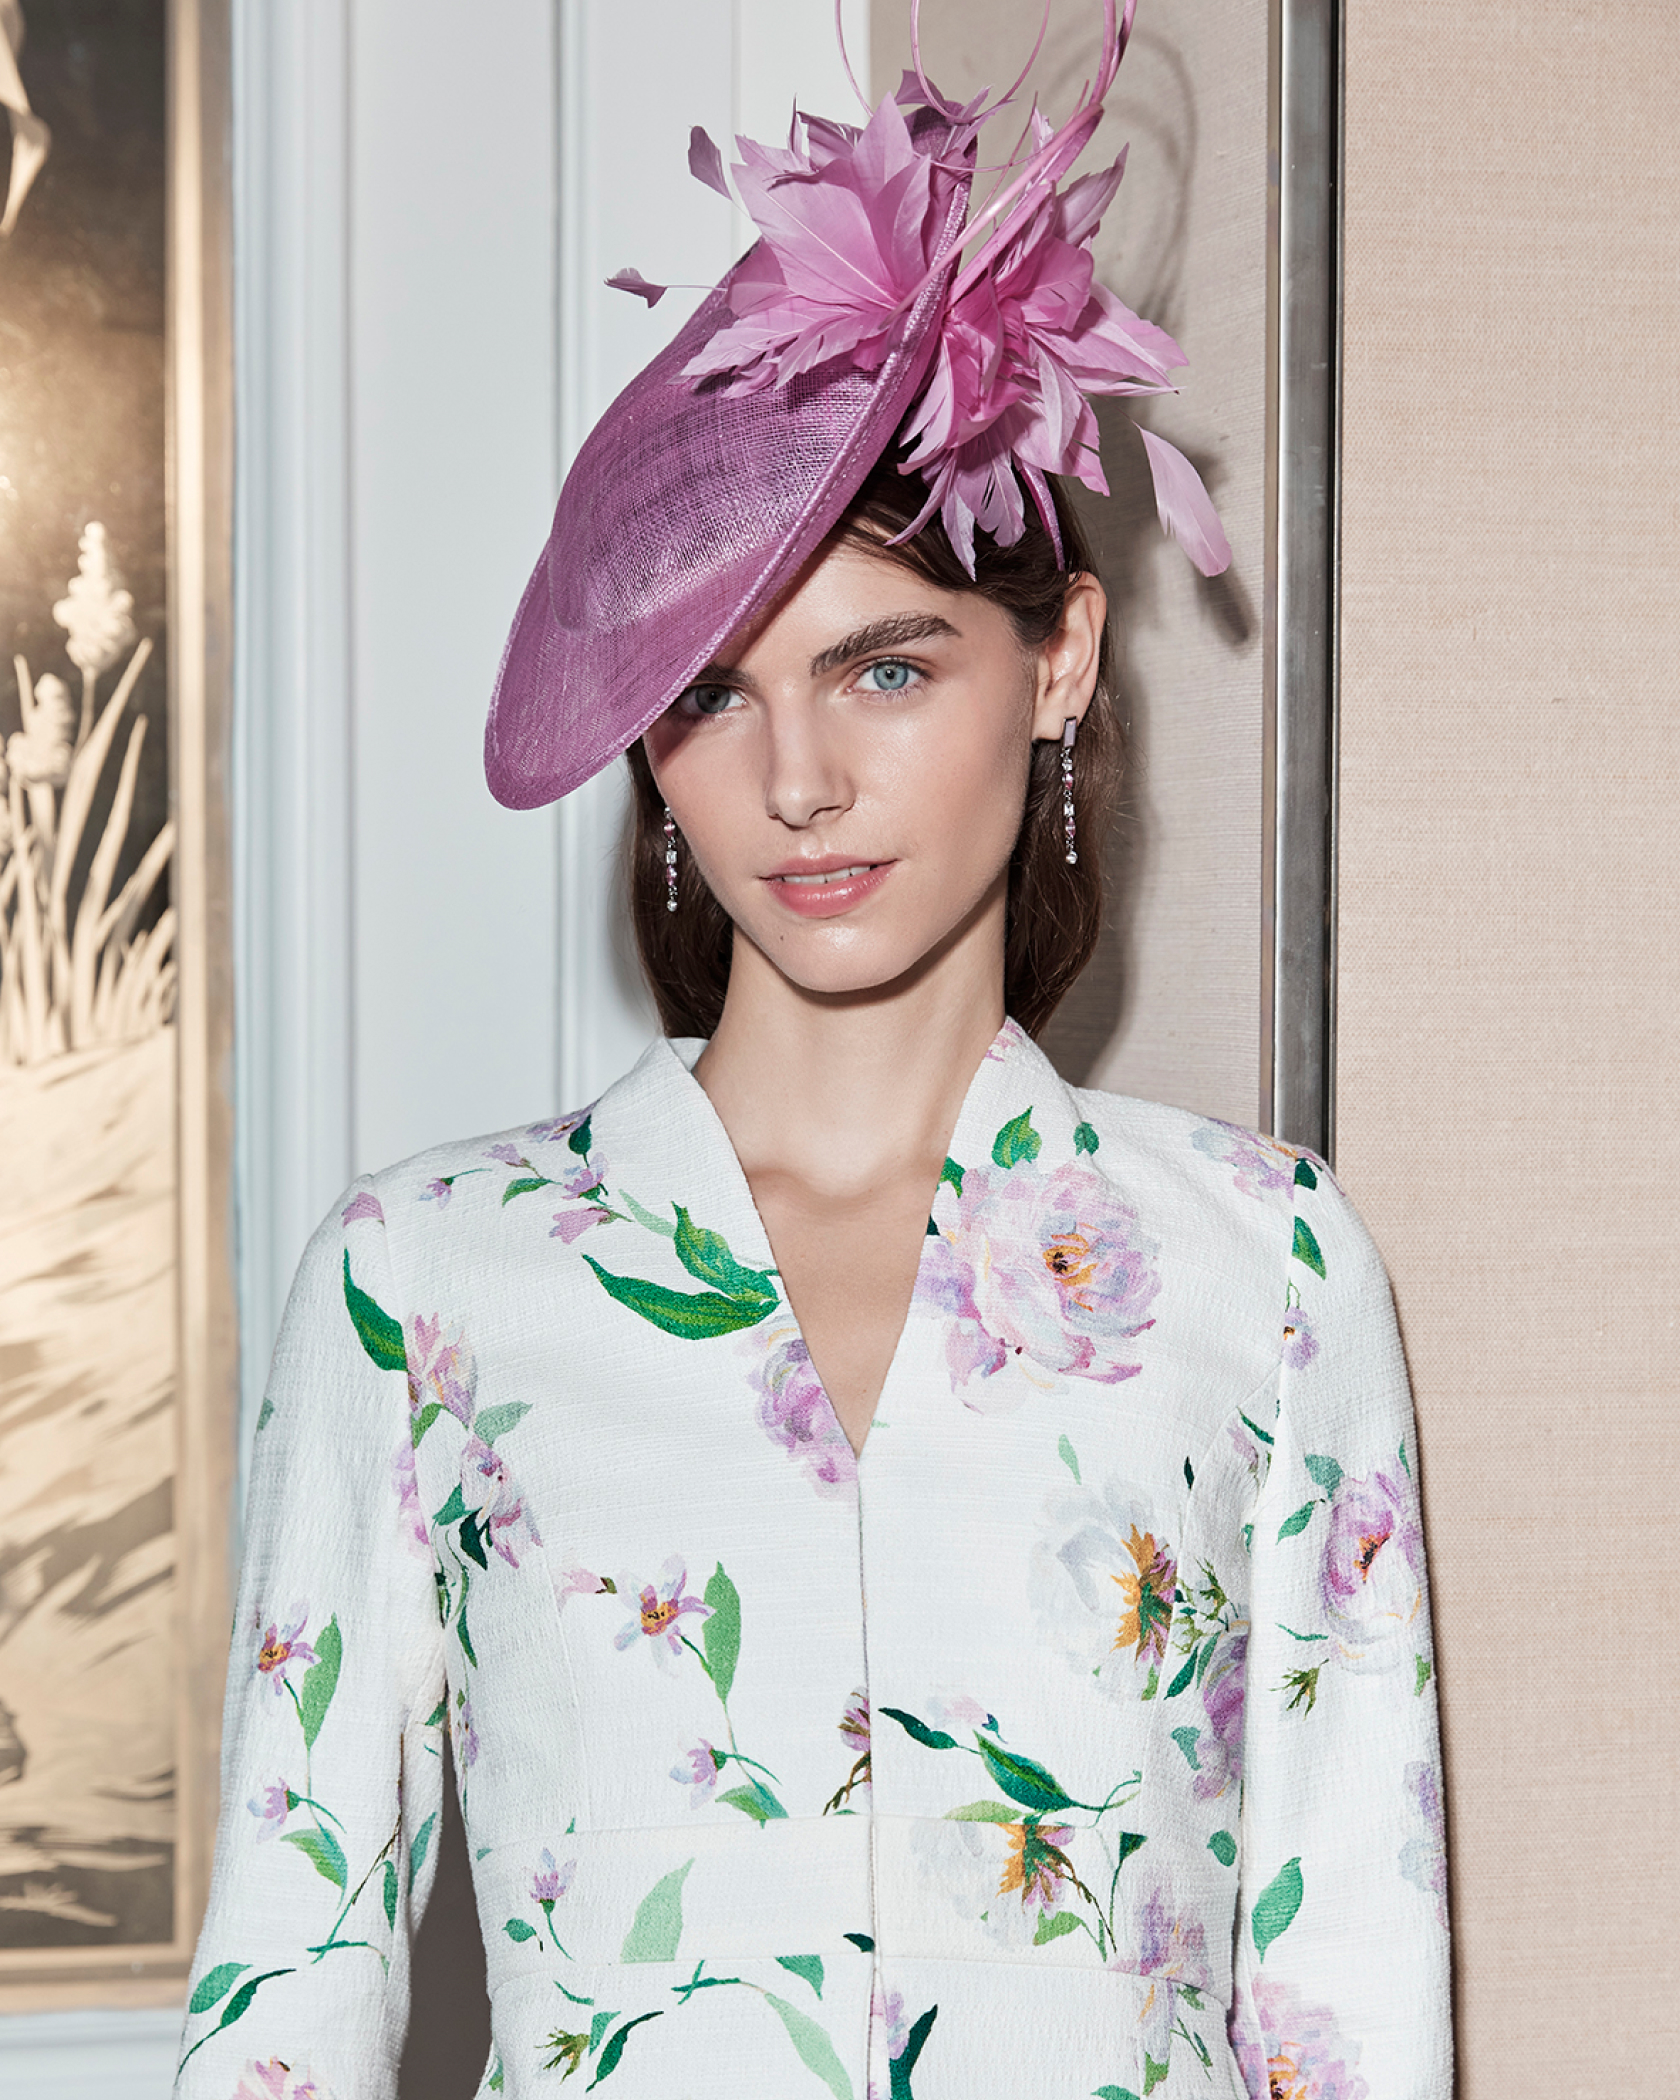 Hobbs model wears a floral two-piece suit and pink fascinator.